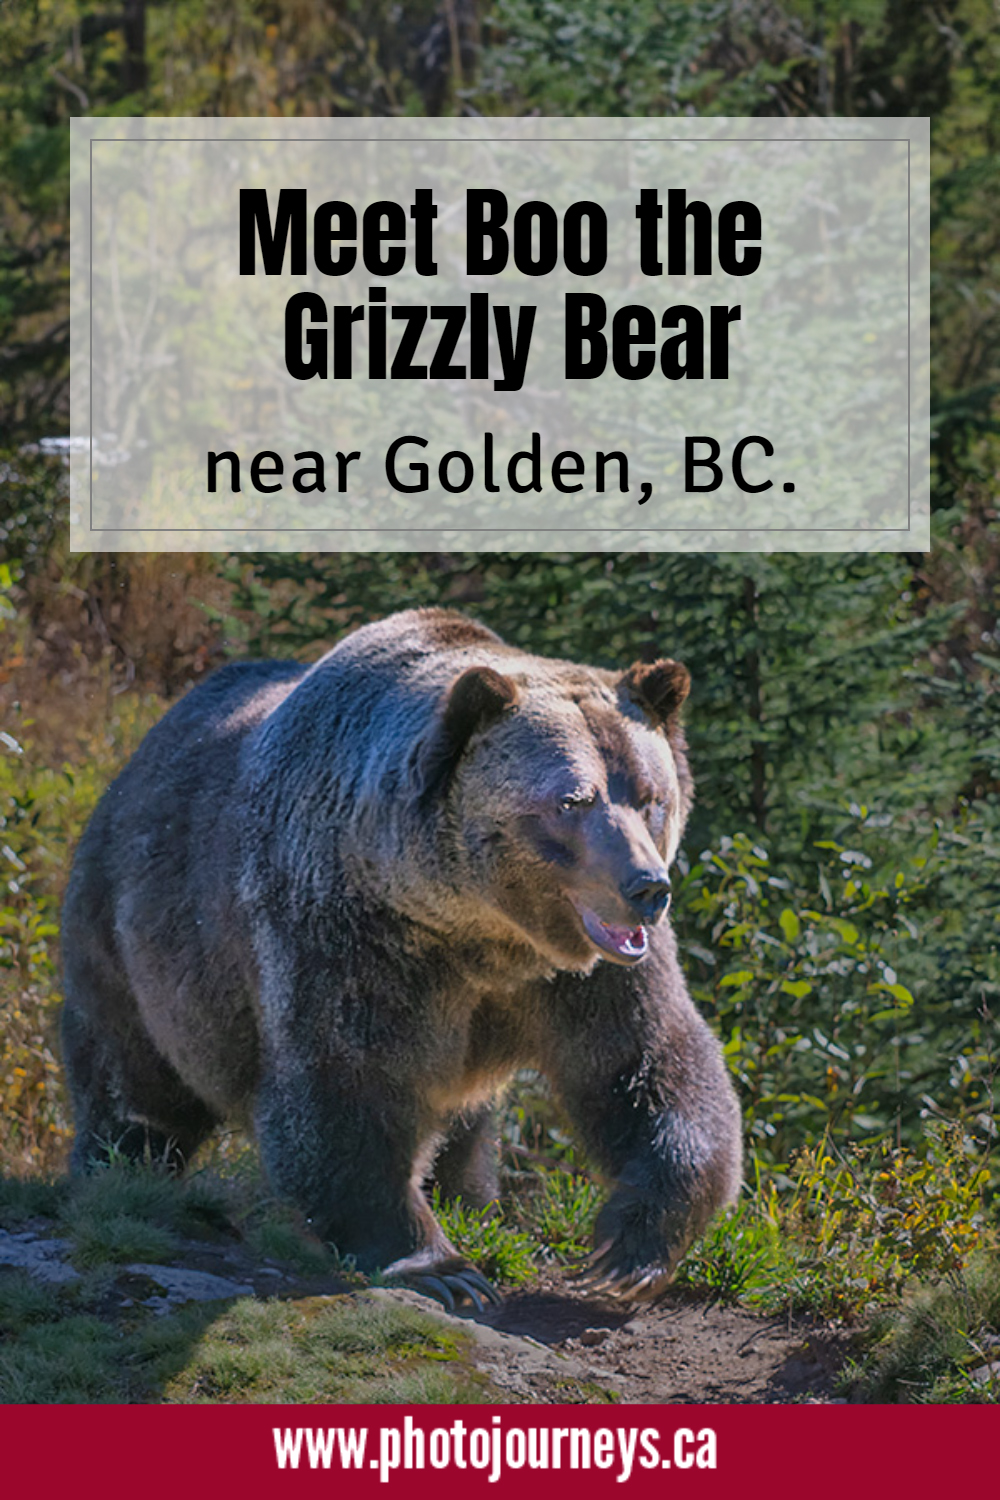 PIN for Boo the Grizzly Bear at Grizzly Bear Refuge, Golden, BC